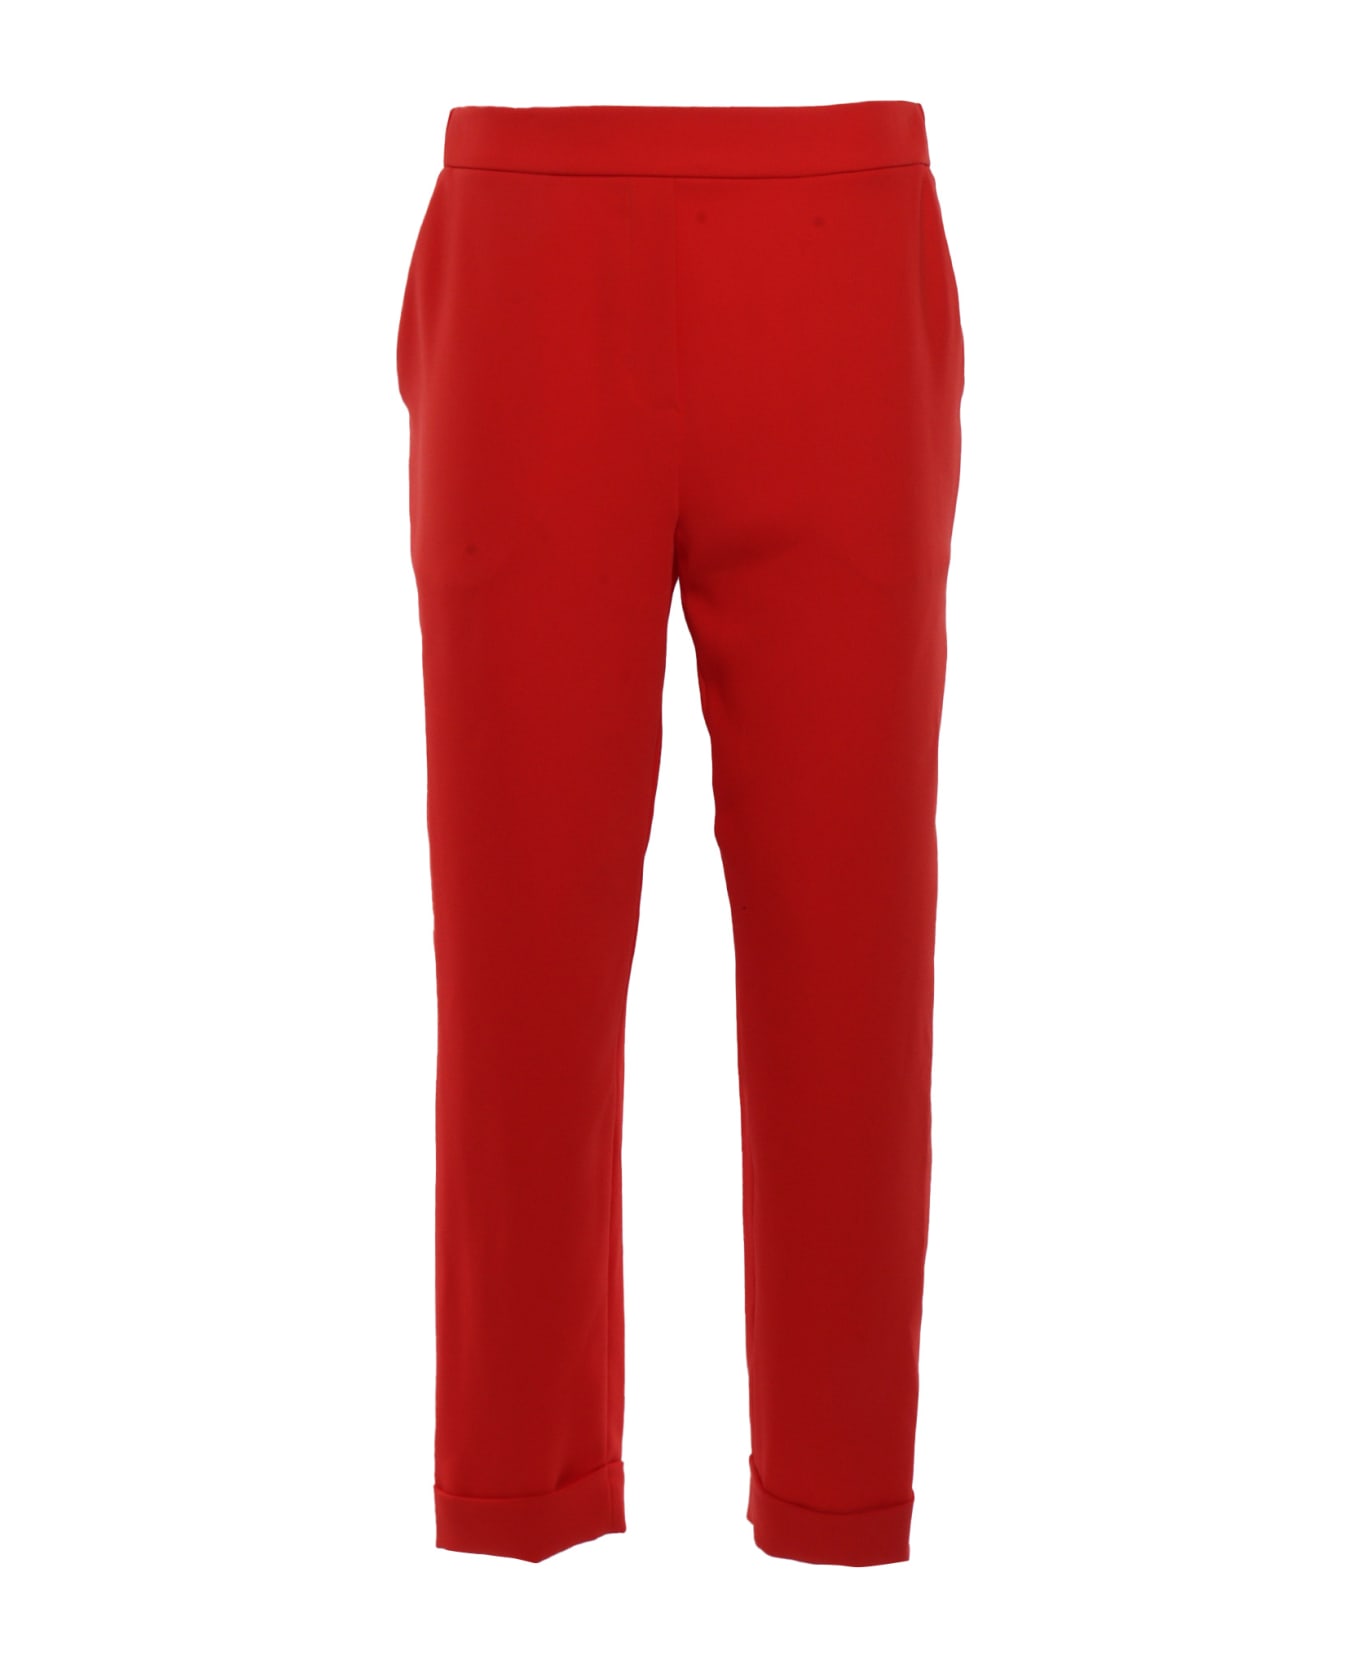 Parosh Red Trousers - RED